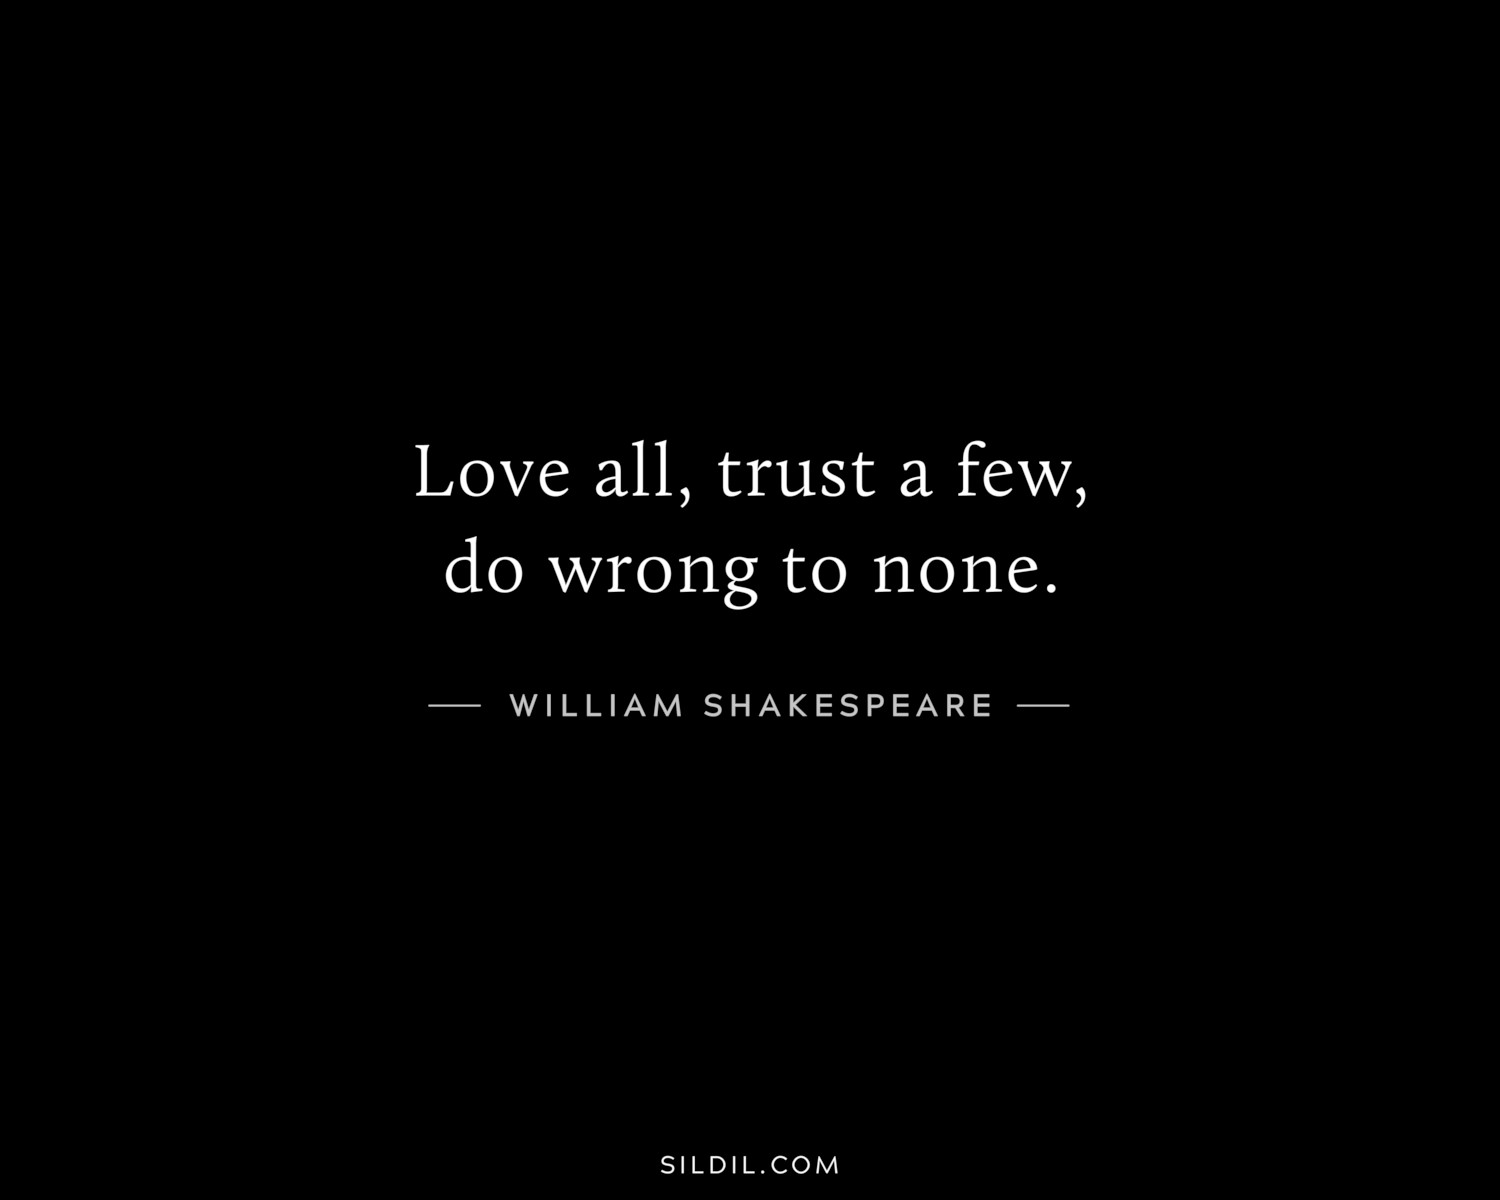 Love all, trust a few, do wrong to none.